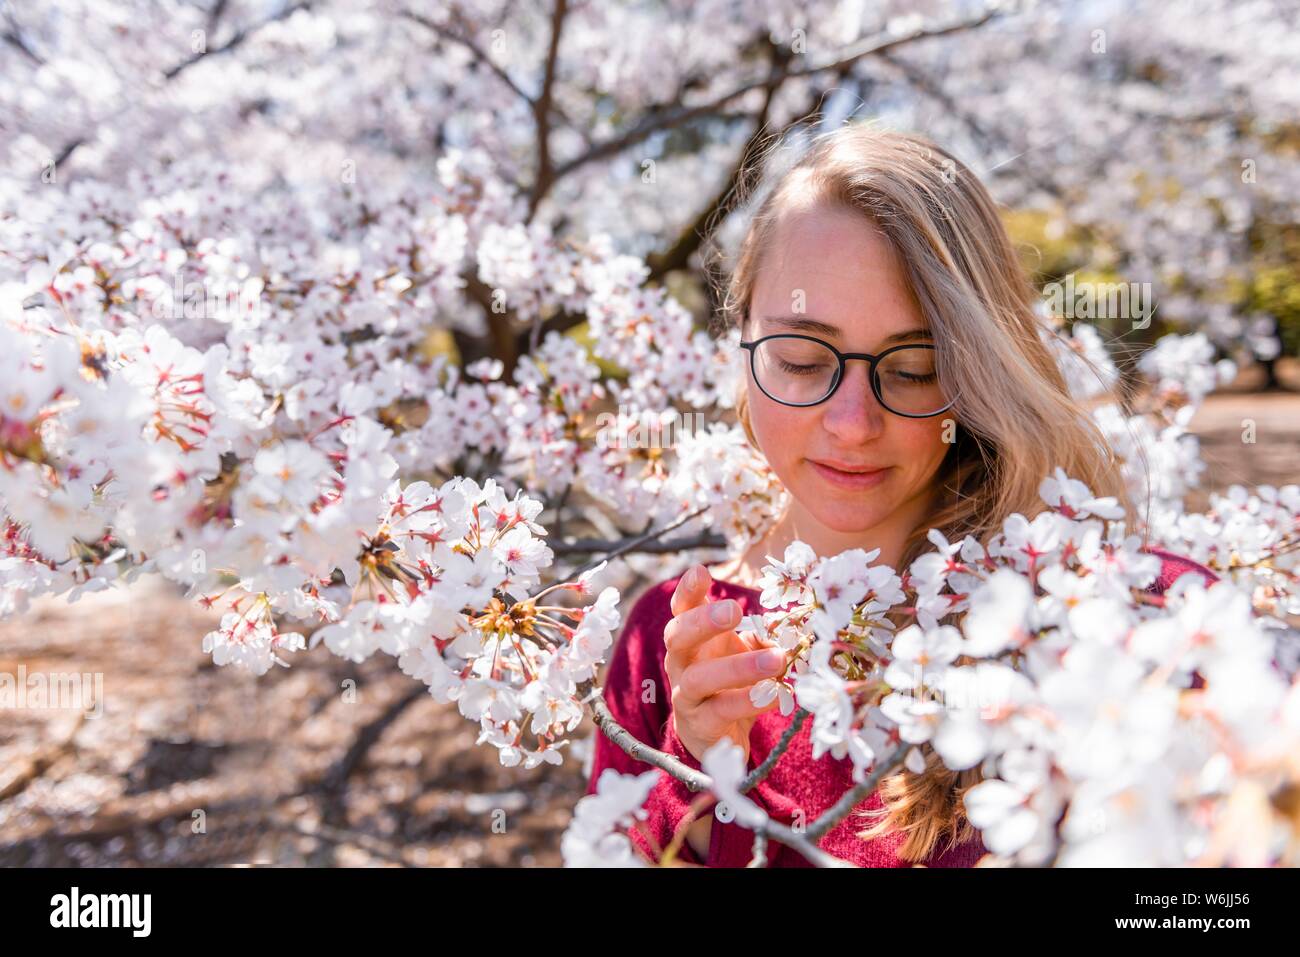 Portrait, Young woman between blooming cherry blossoms, Japanese cherry blossom in spring, Tokyo, Japan Stock Photo